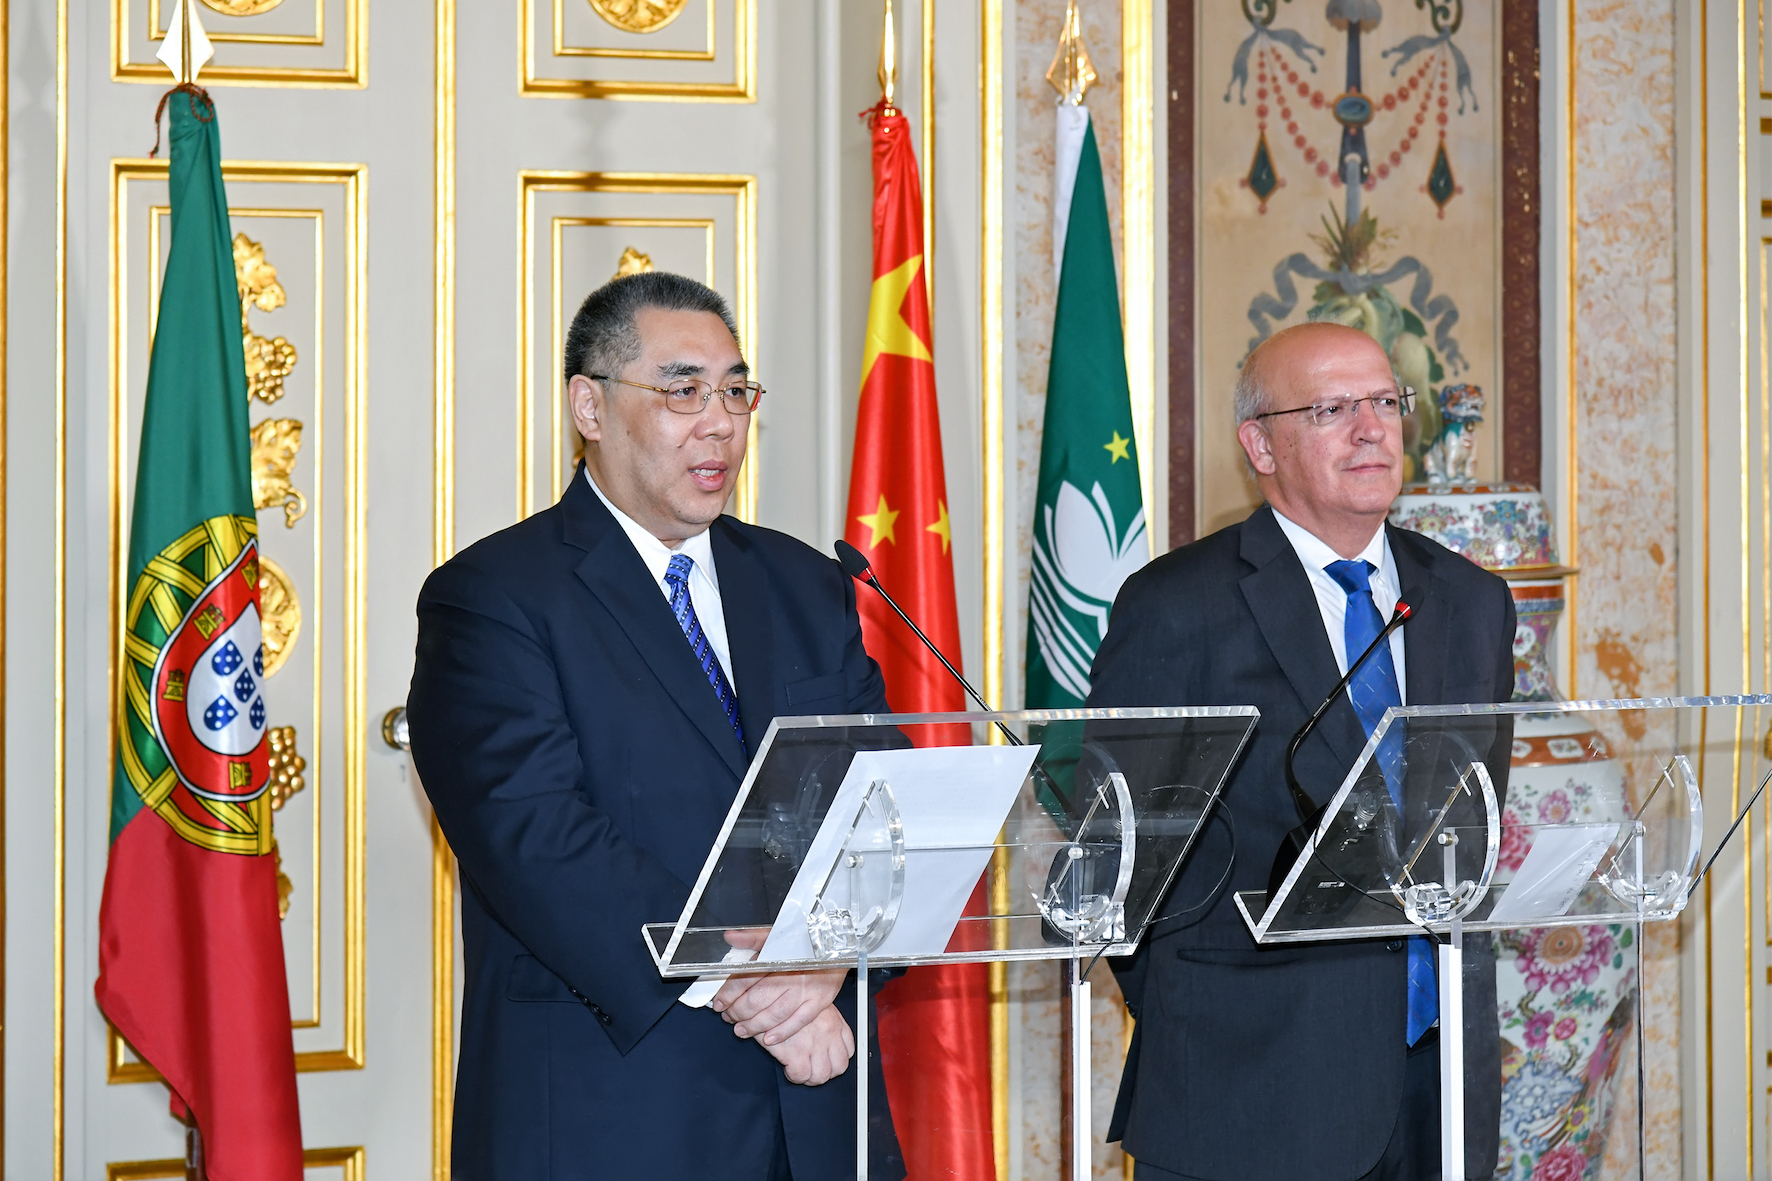 Macau-Portugal extradition deal excludes political crimes